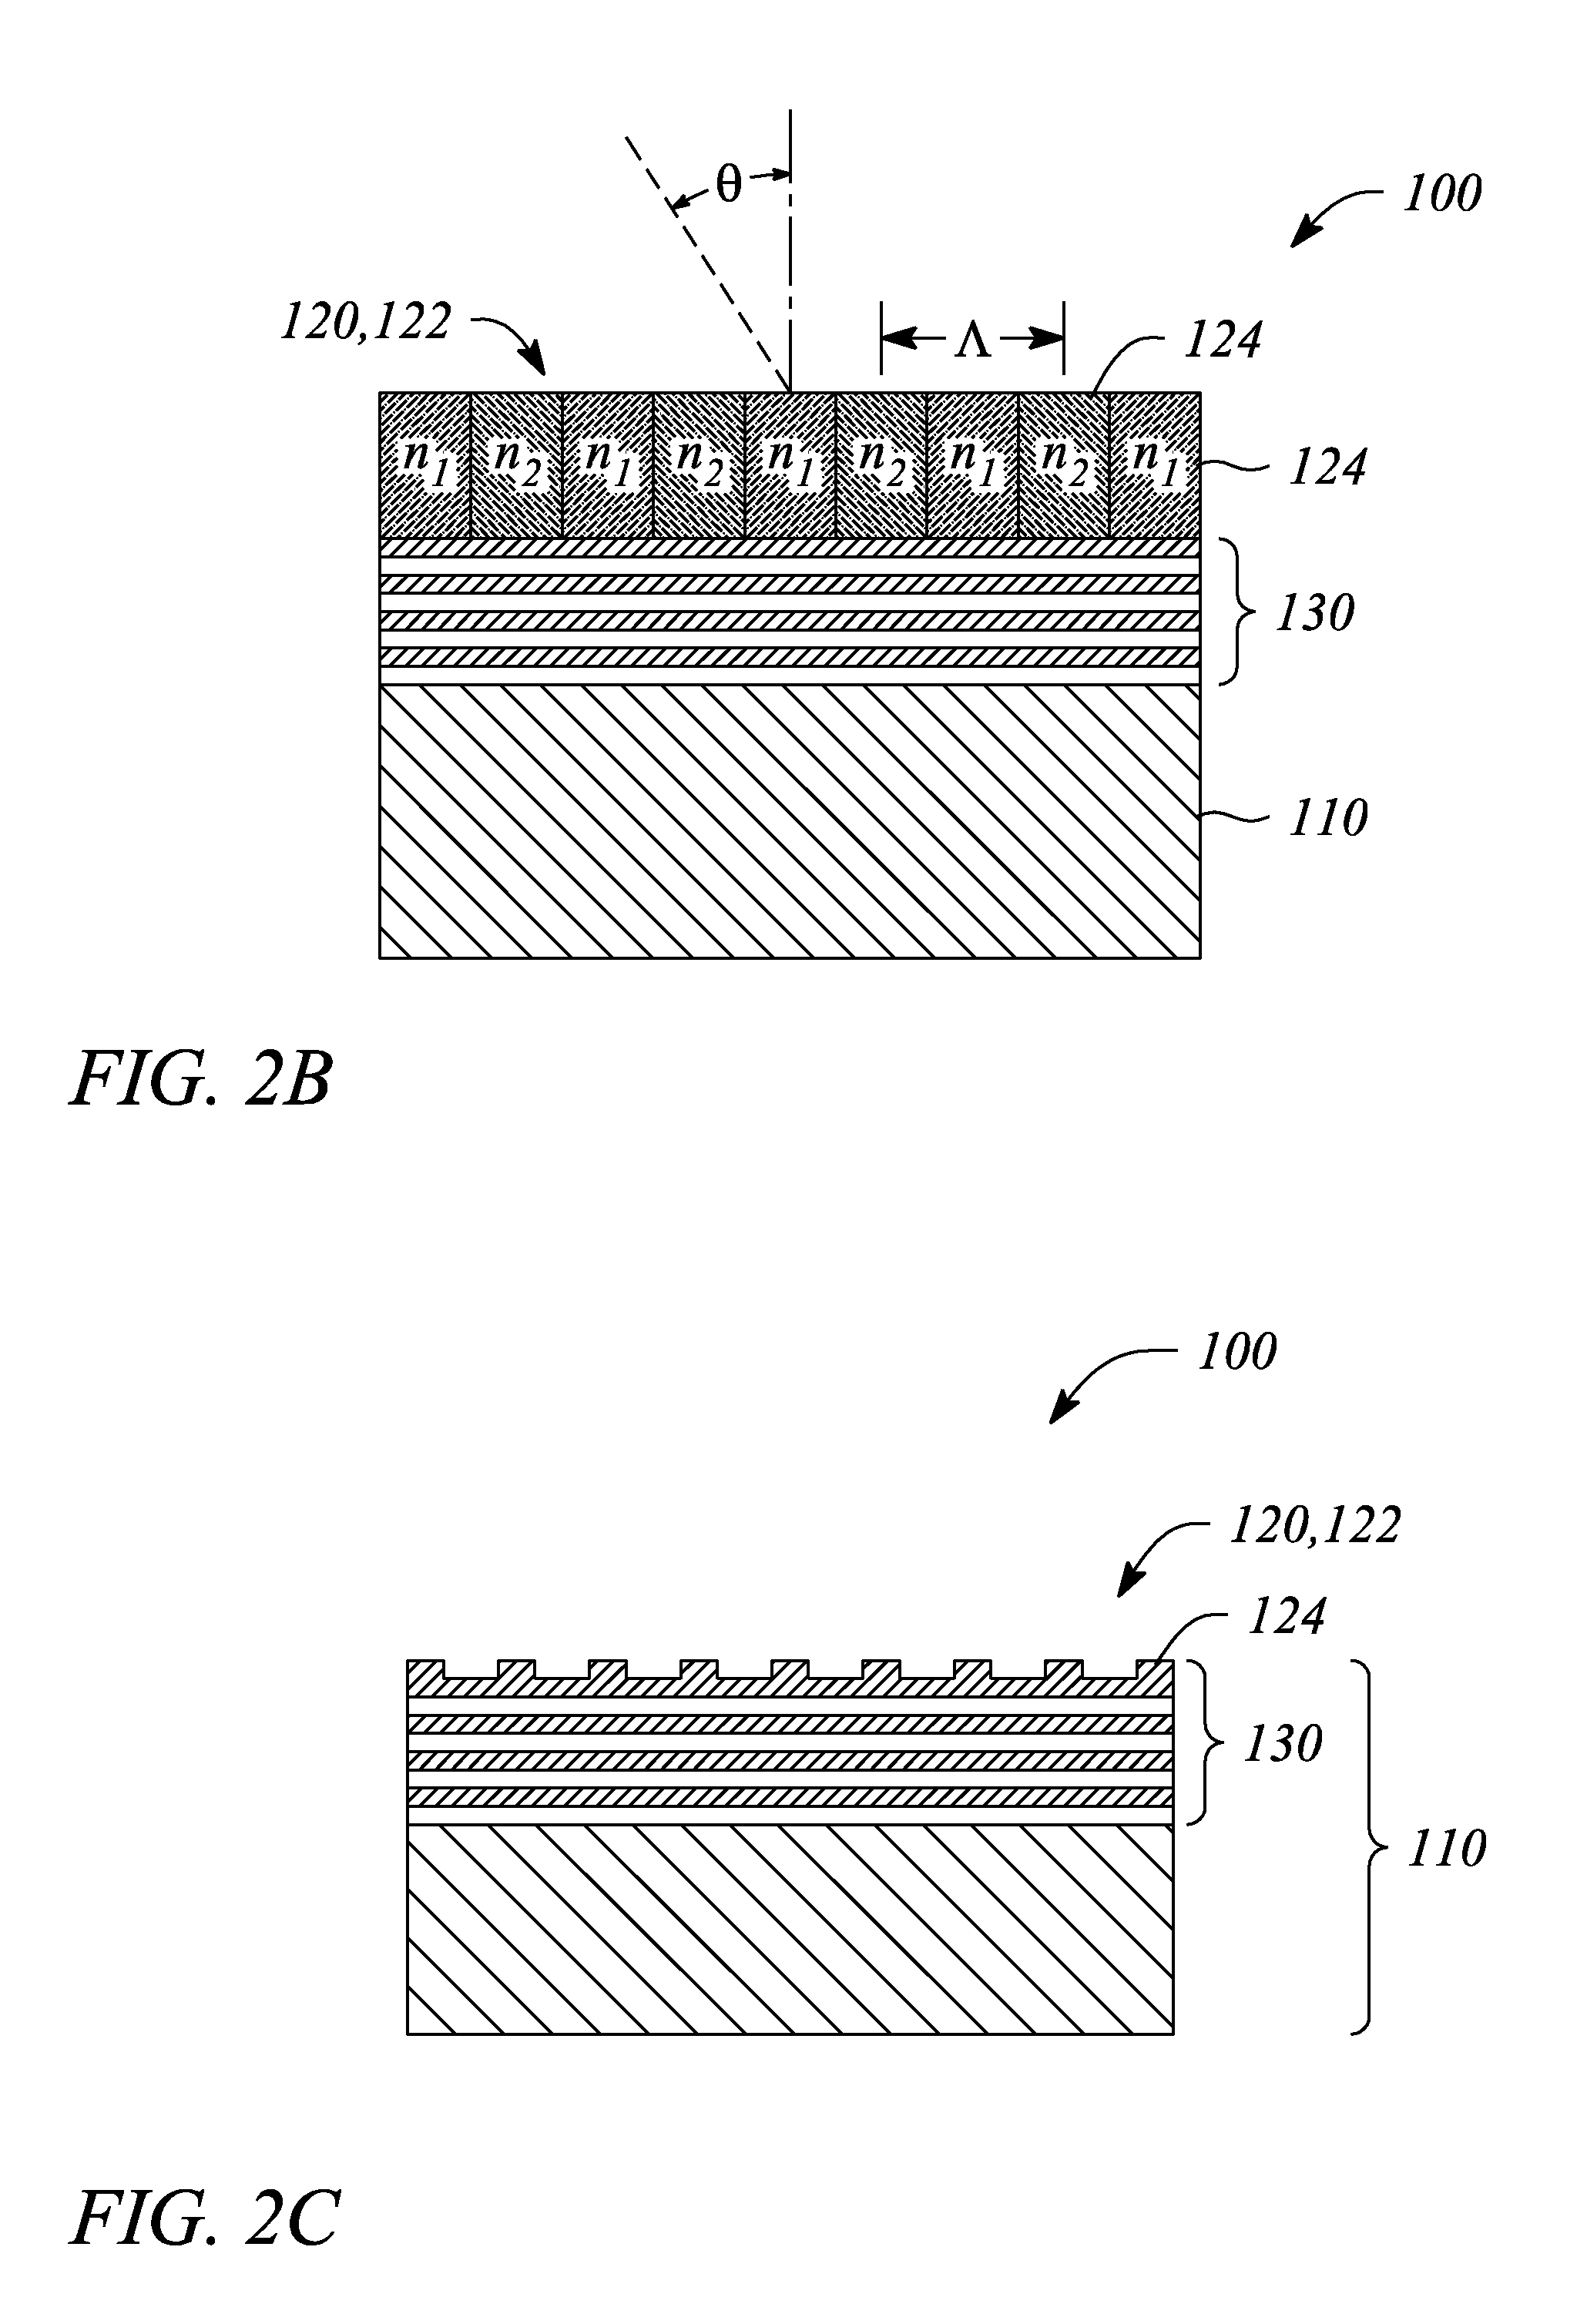 Hybrid Guided-Mode Resonance Filter And Method Employing Distributed Bragg Reflection